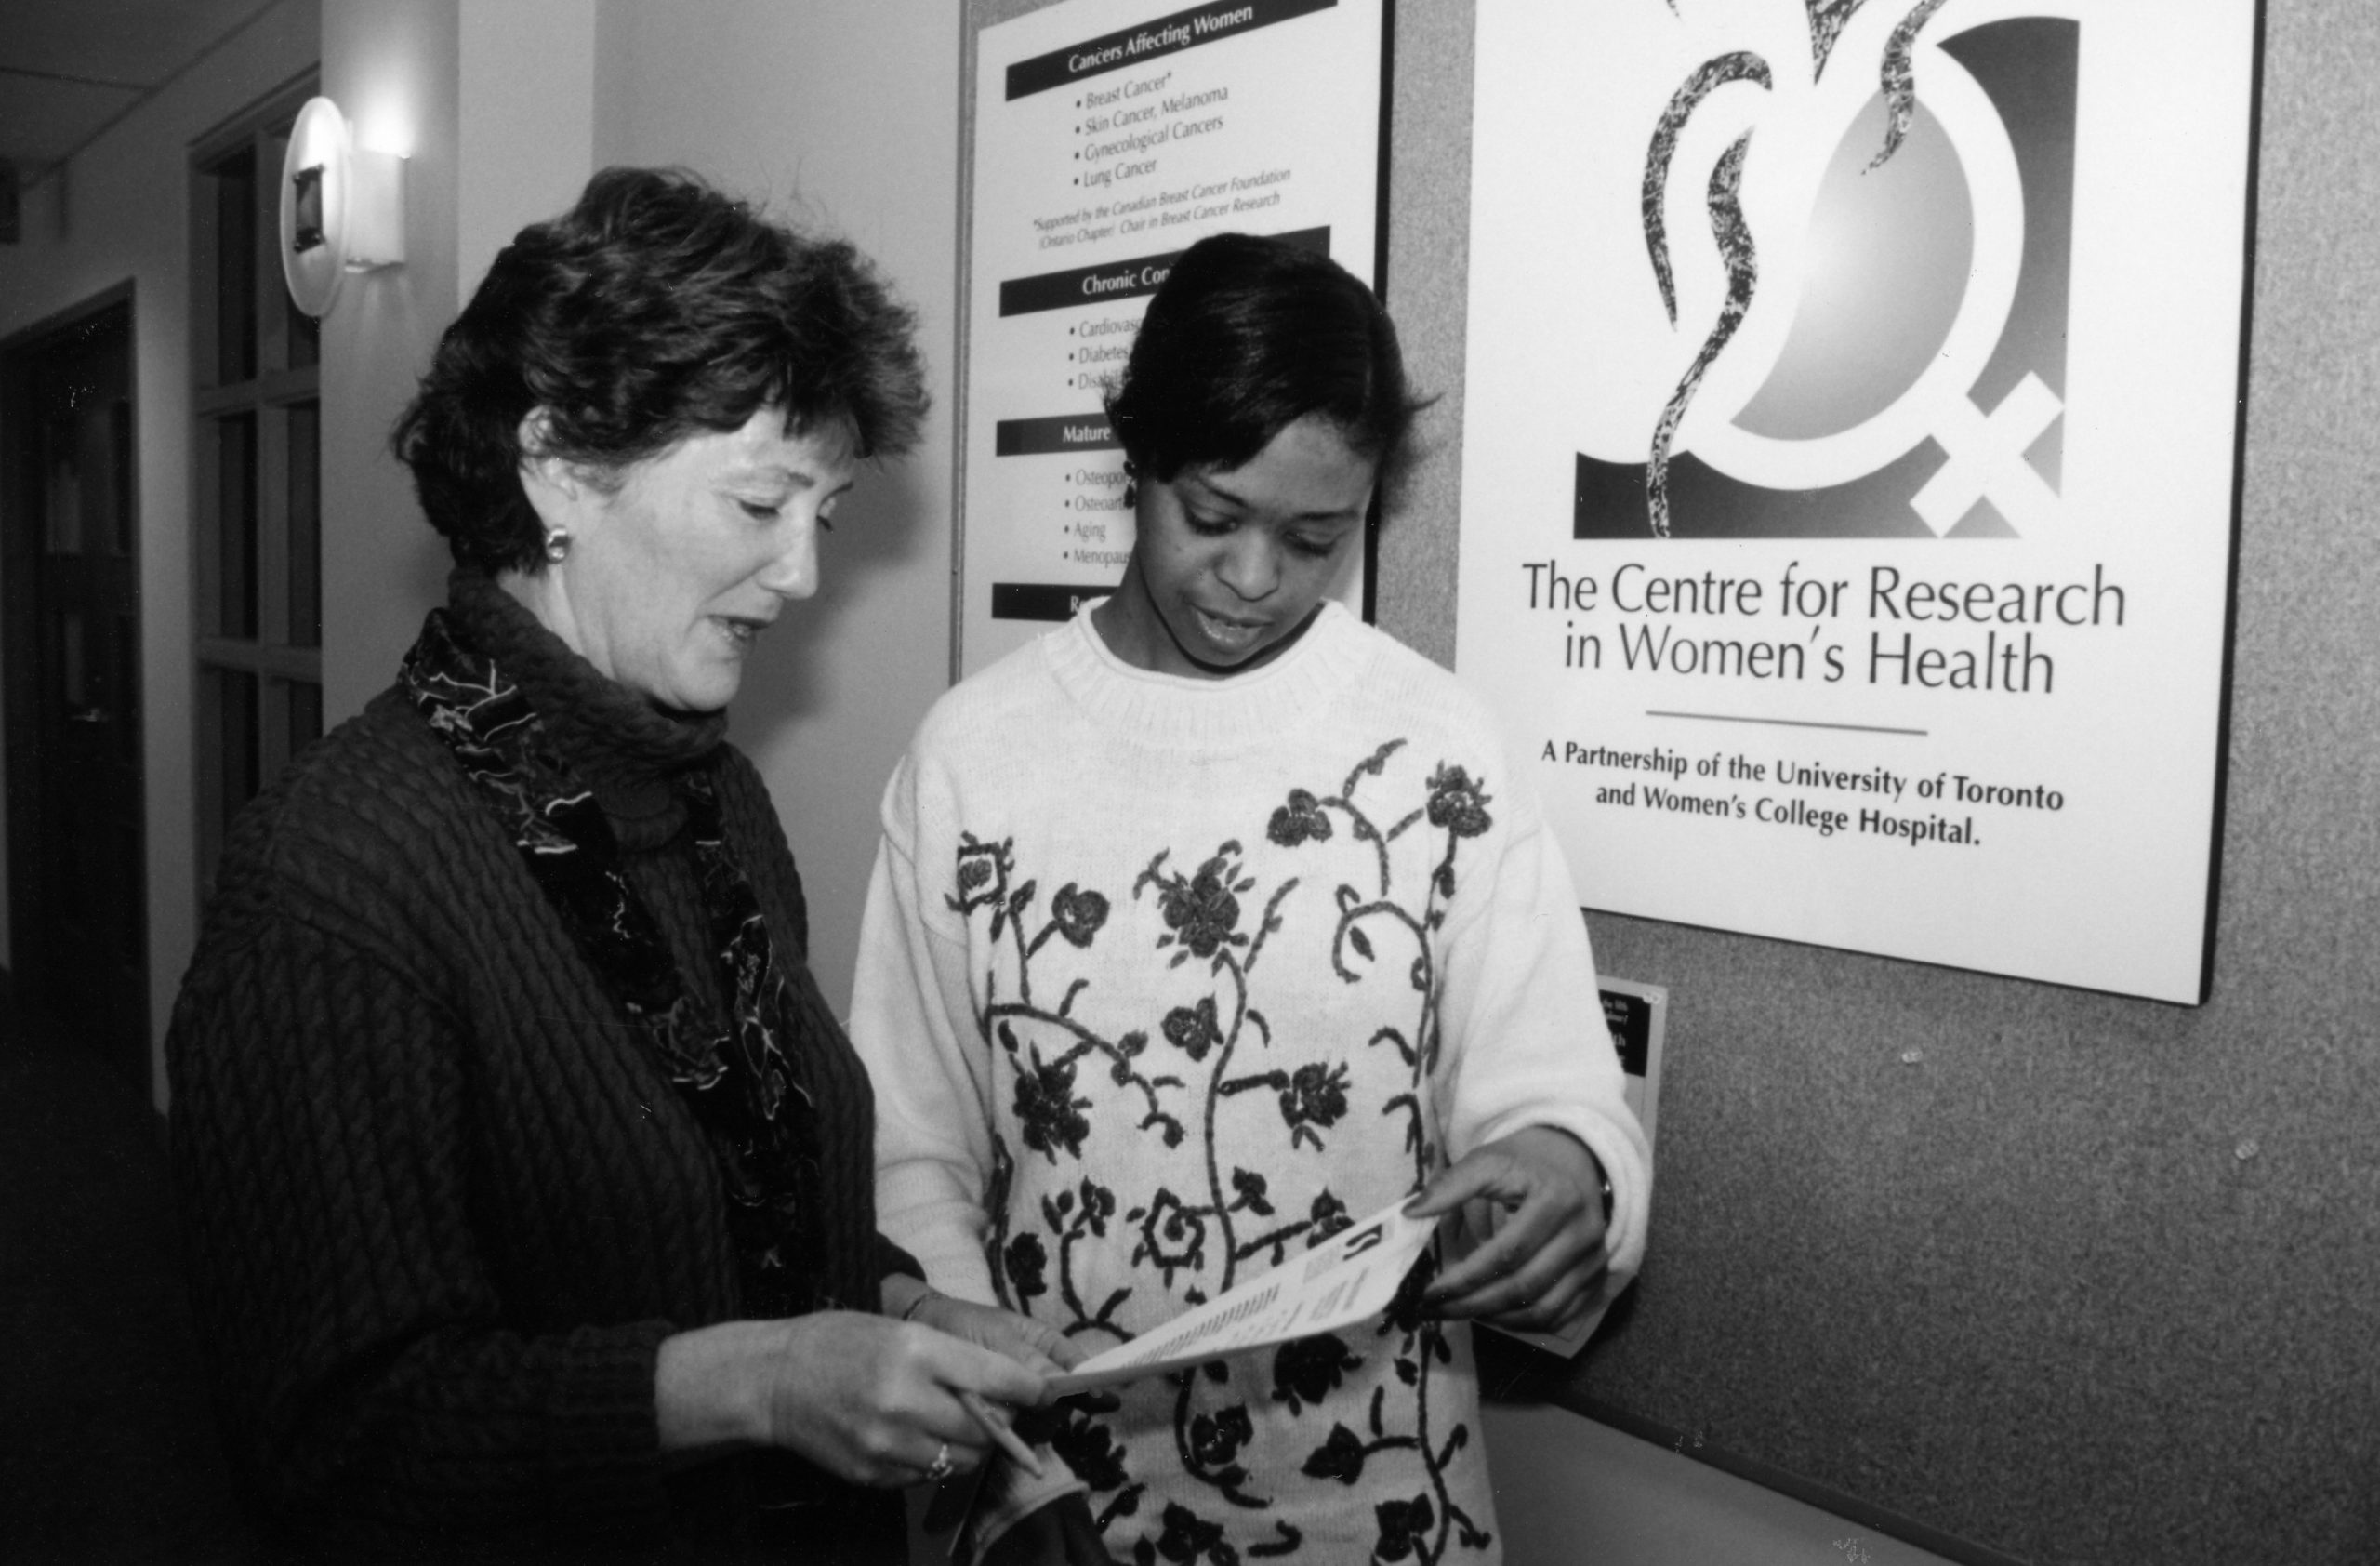 Two women examine a brochure; a large sign on the wall by them reads "The Centre for Research in Women's Health."